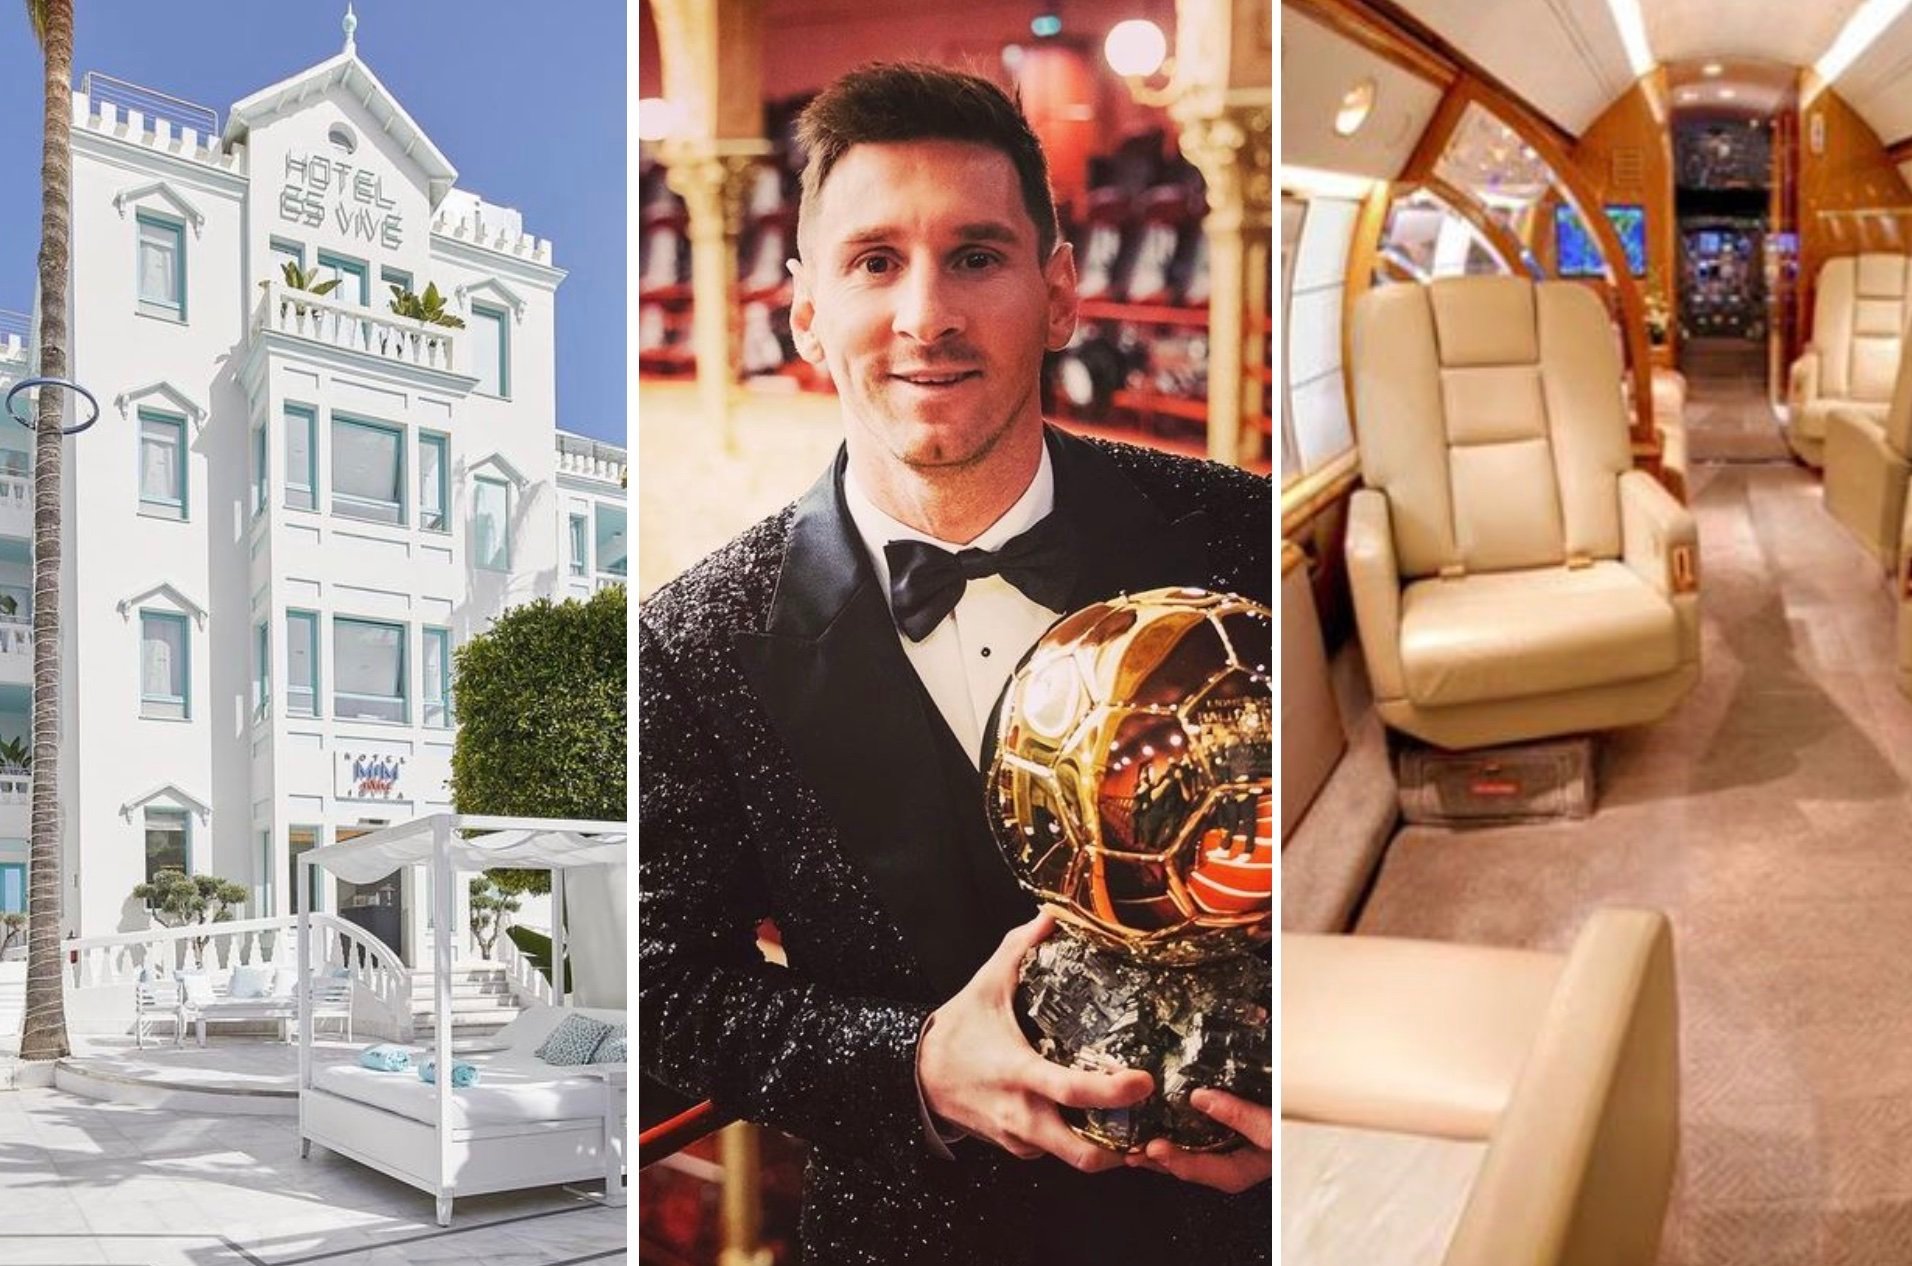 Lionel Messi is currently the world’s highest-paid athlete. Photos: @leomessi/Instagram, @XHSports/Twitter